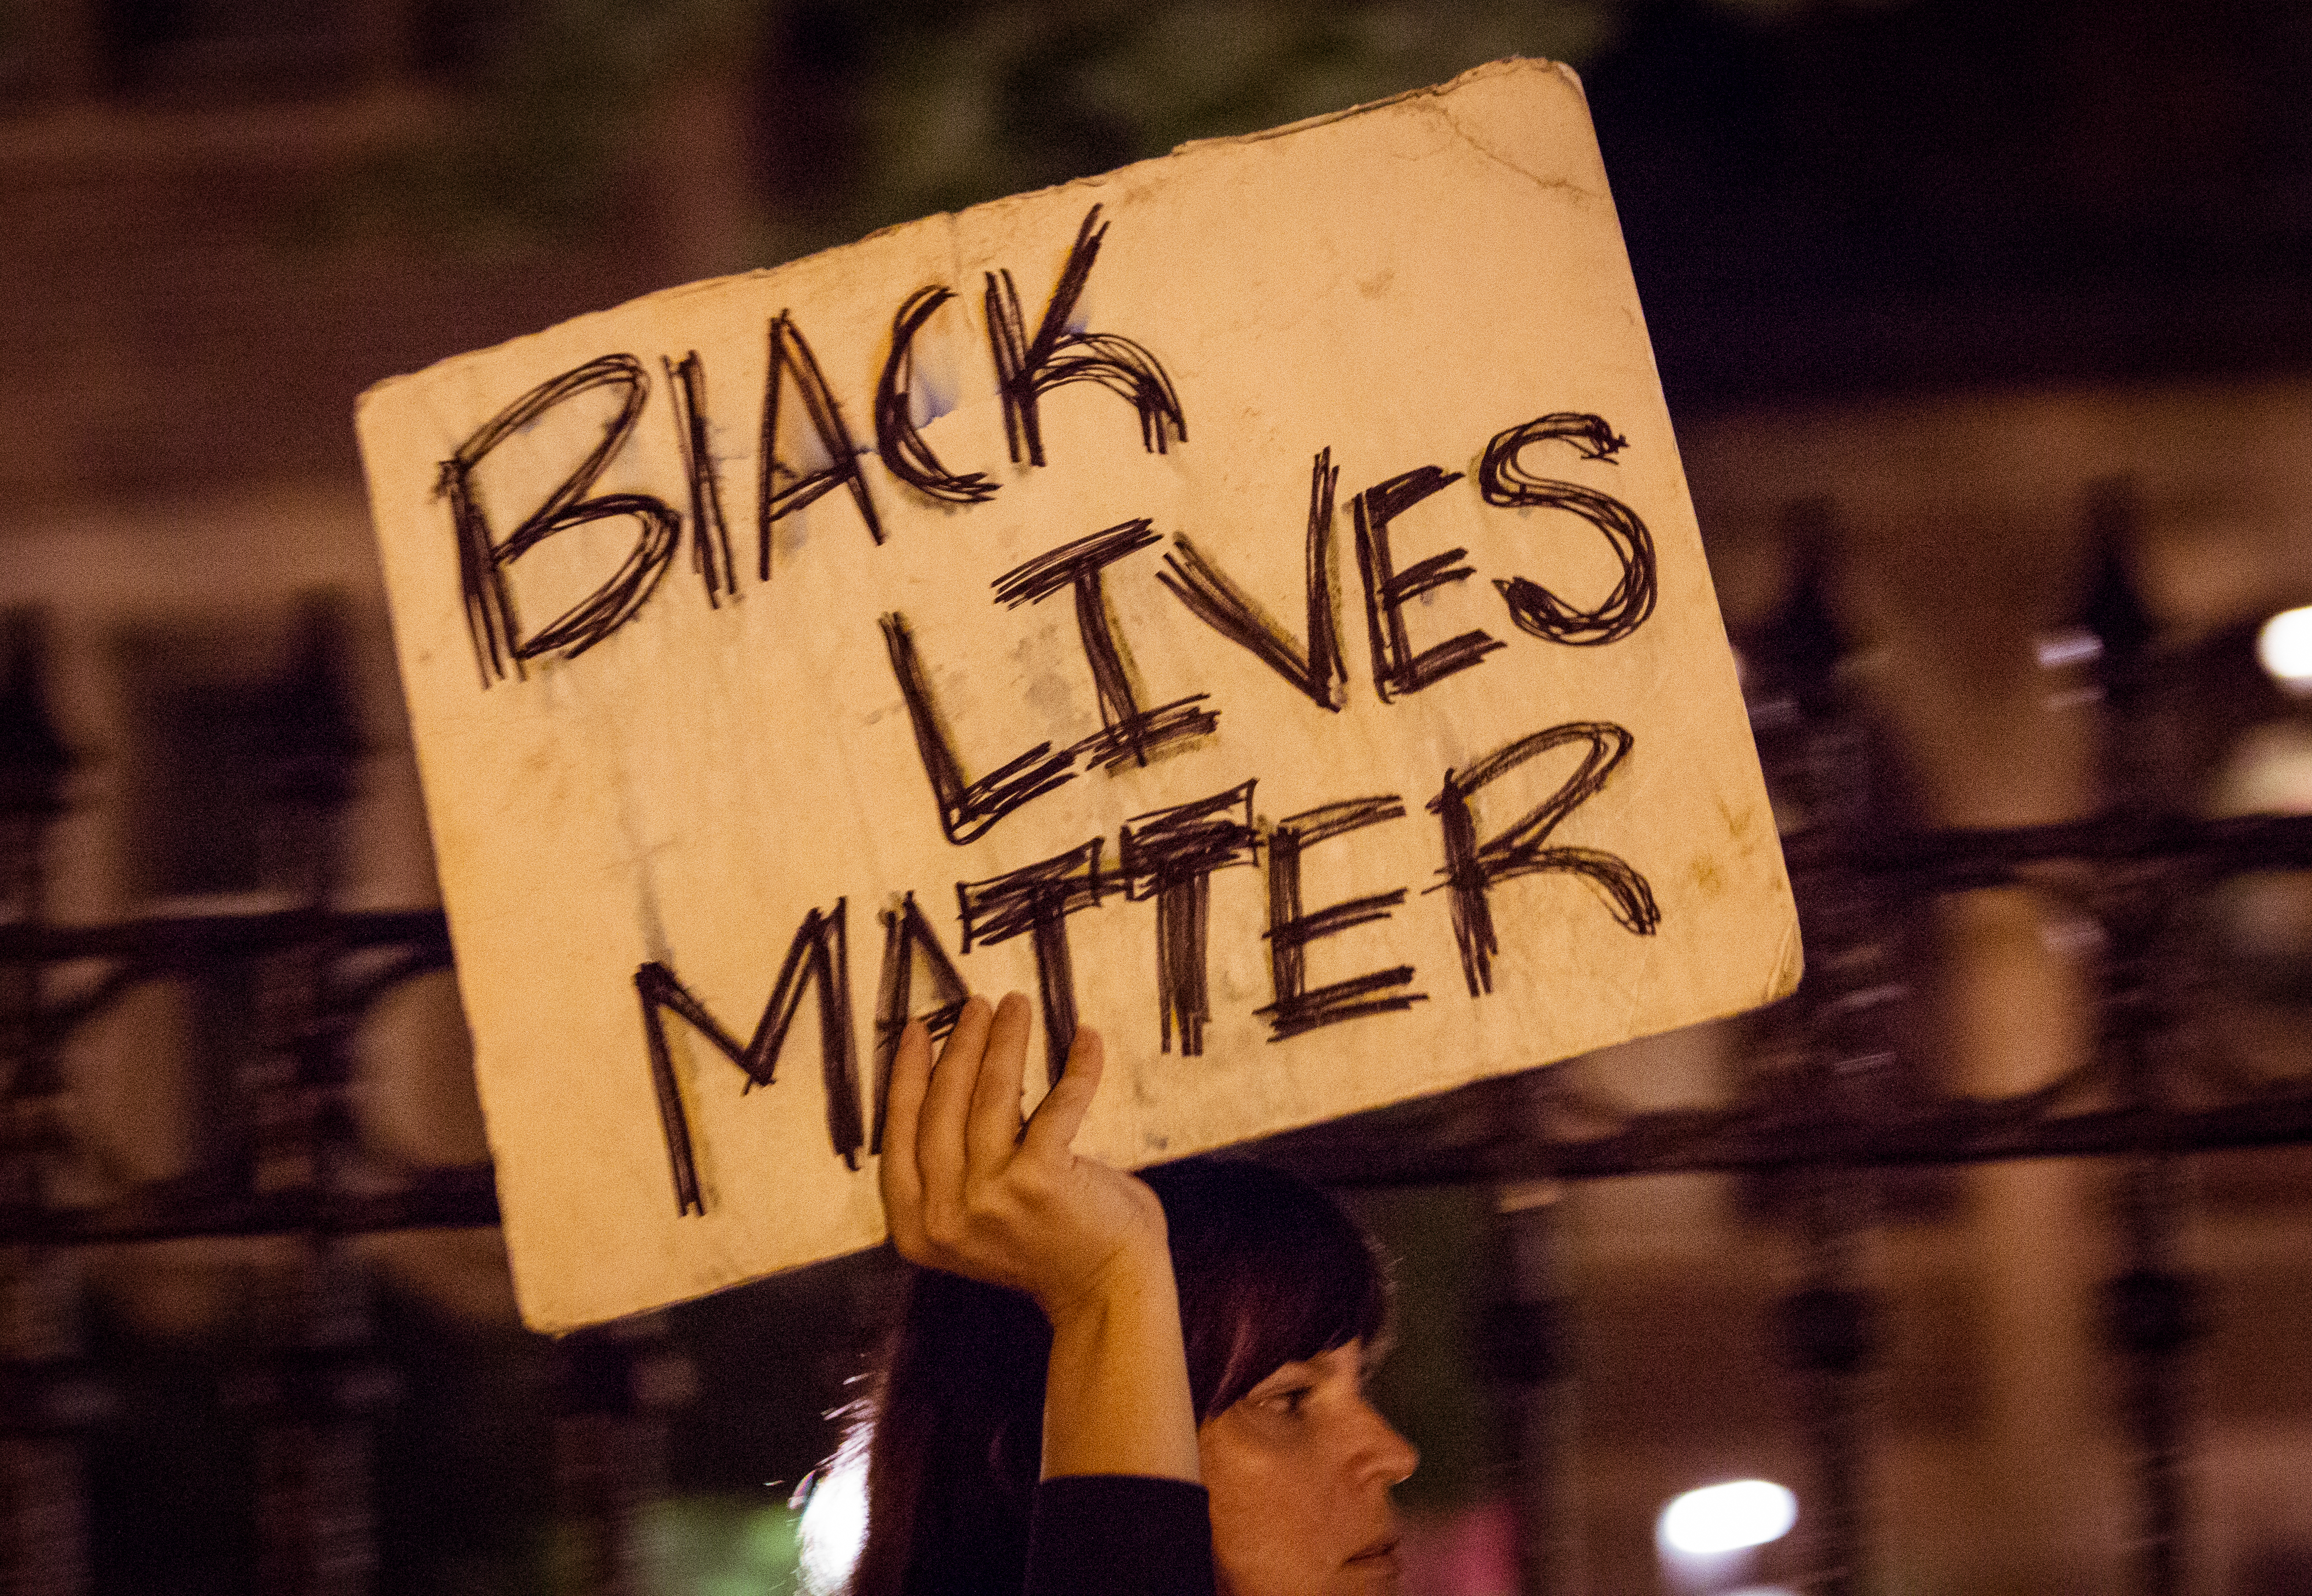 "Black Lives Matter" by Tony Webster (CC BY-SA 2.0)